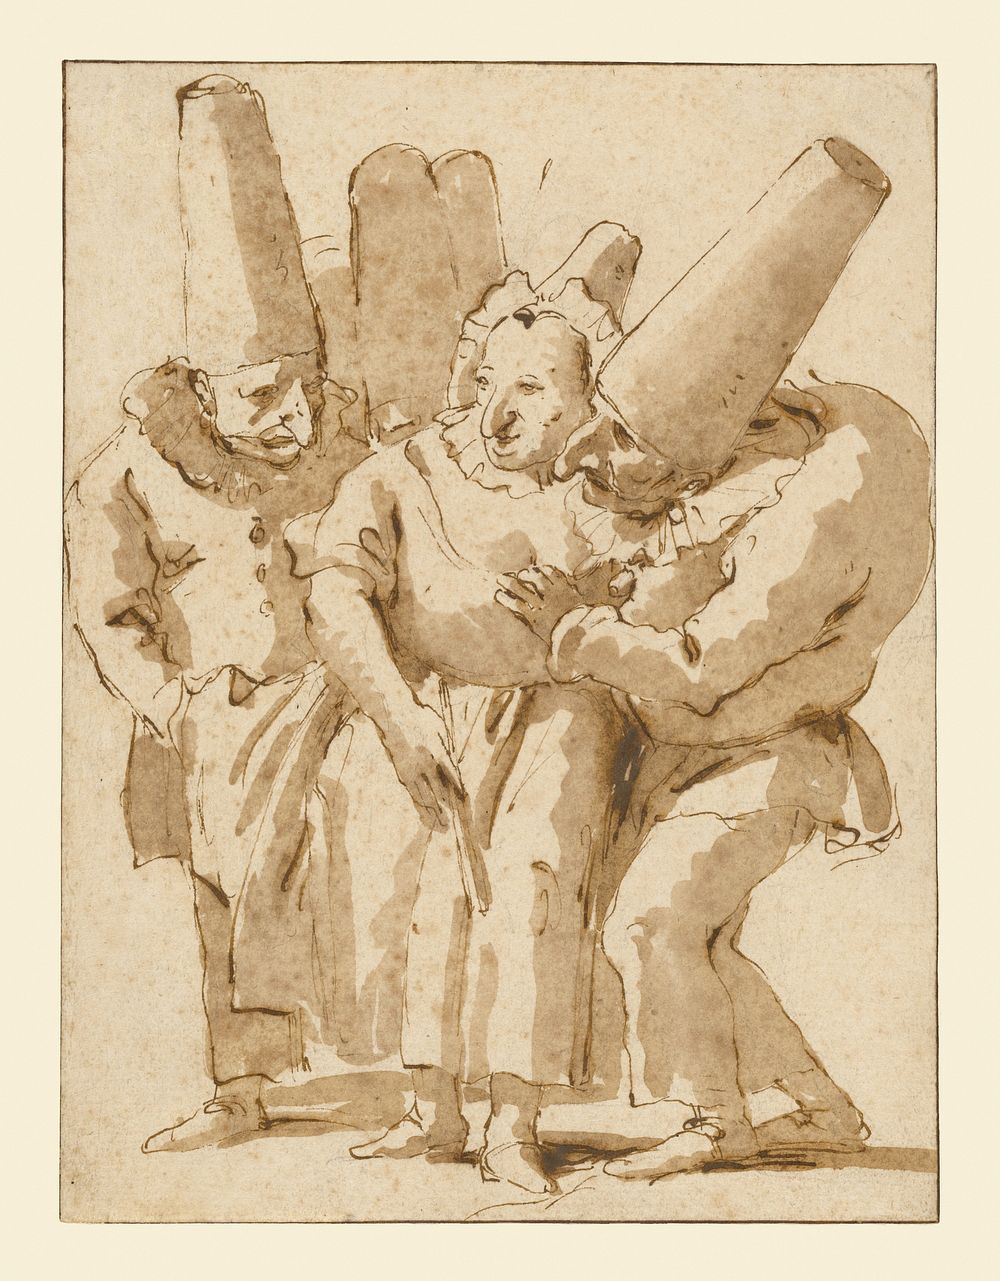 Punchinellos Approaching a Woman by Giovanni Battista Tiepolo